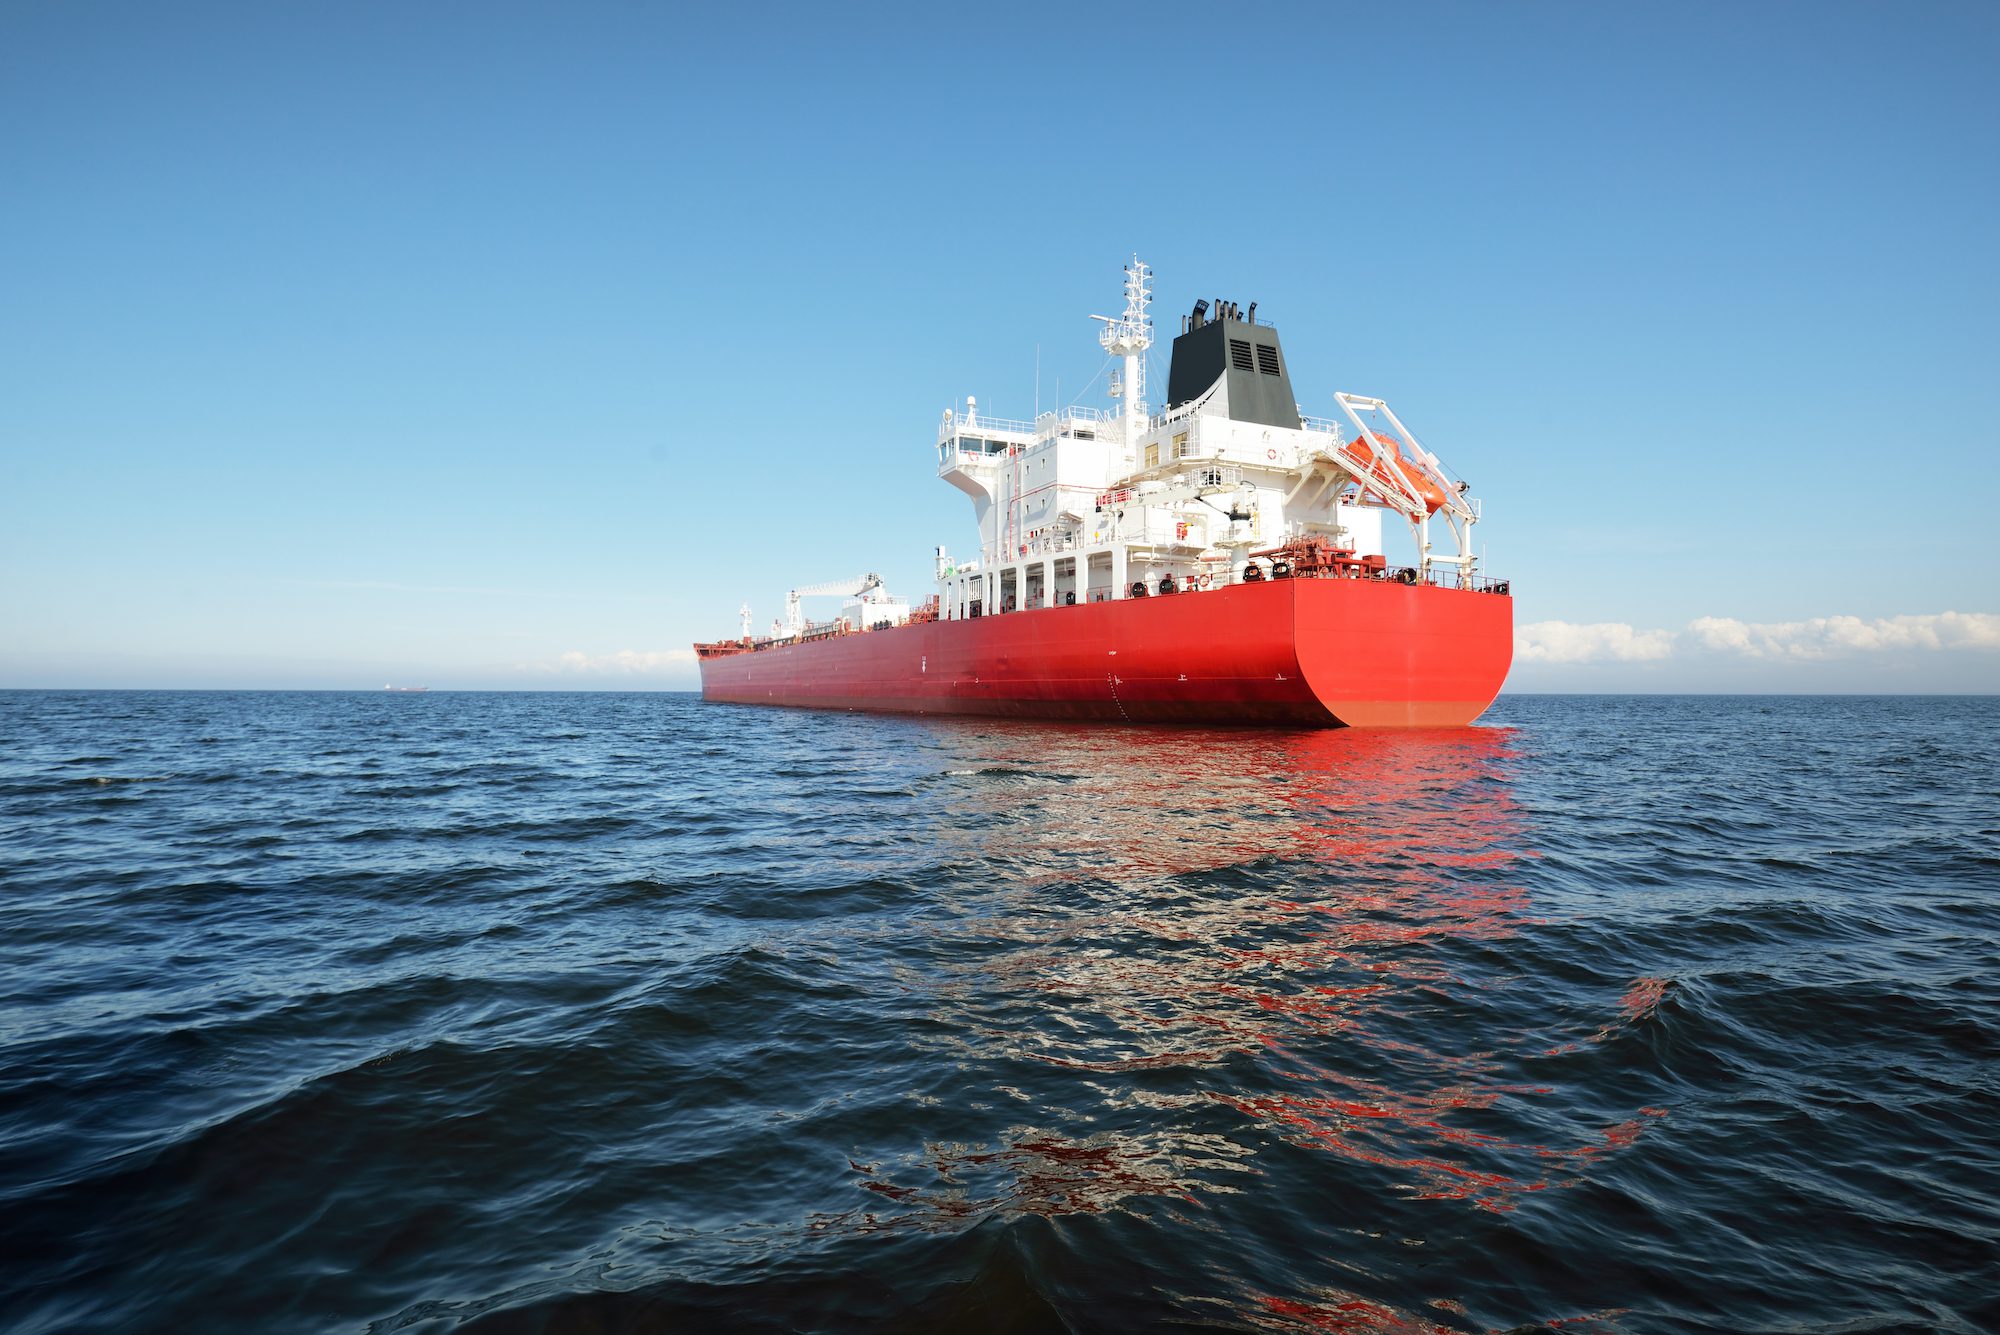 File photo of an oil tanker at sea